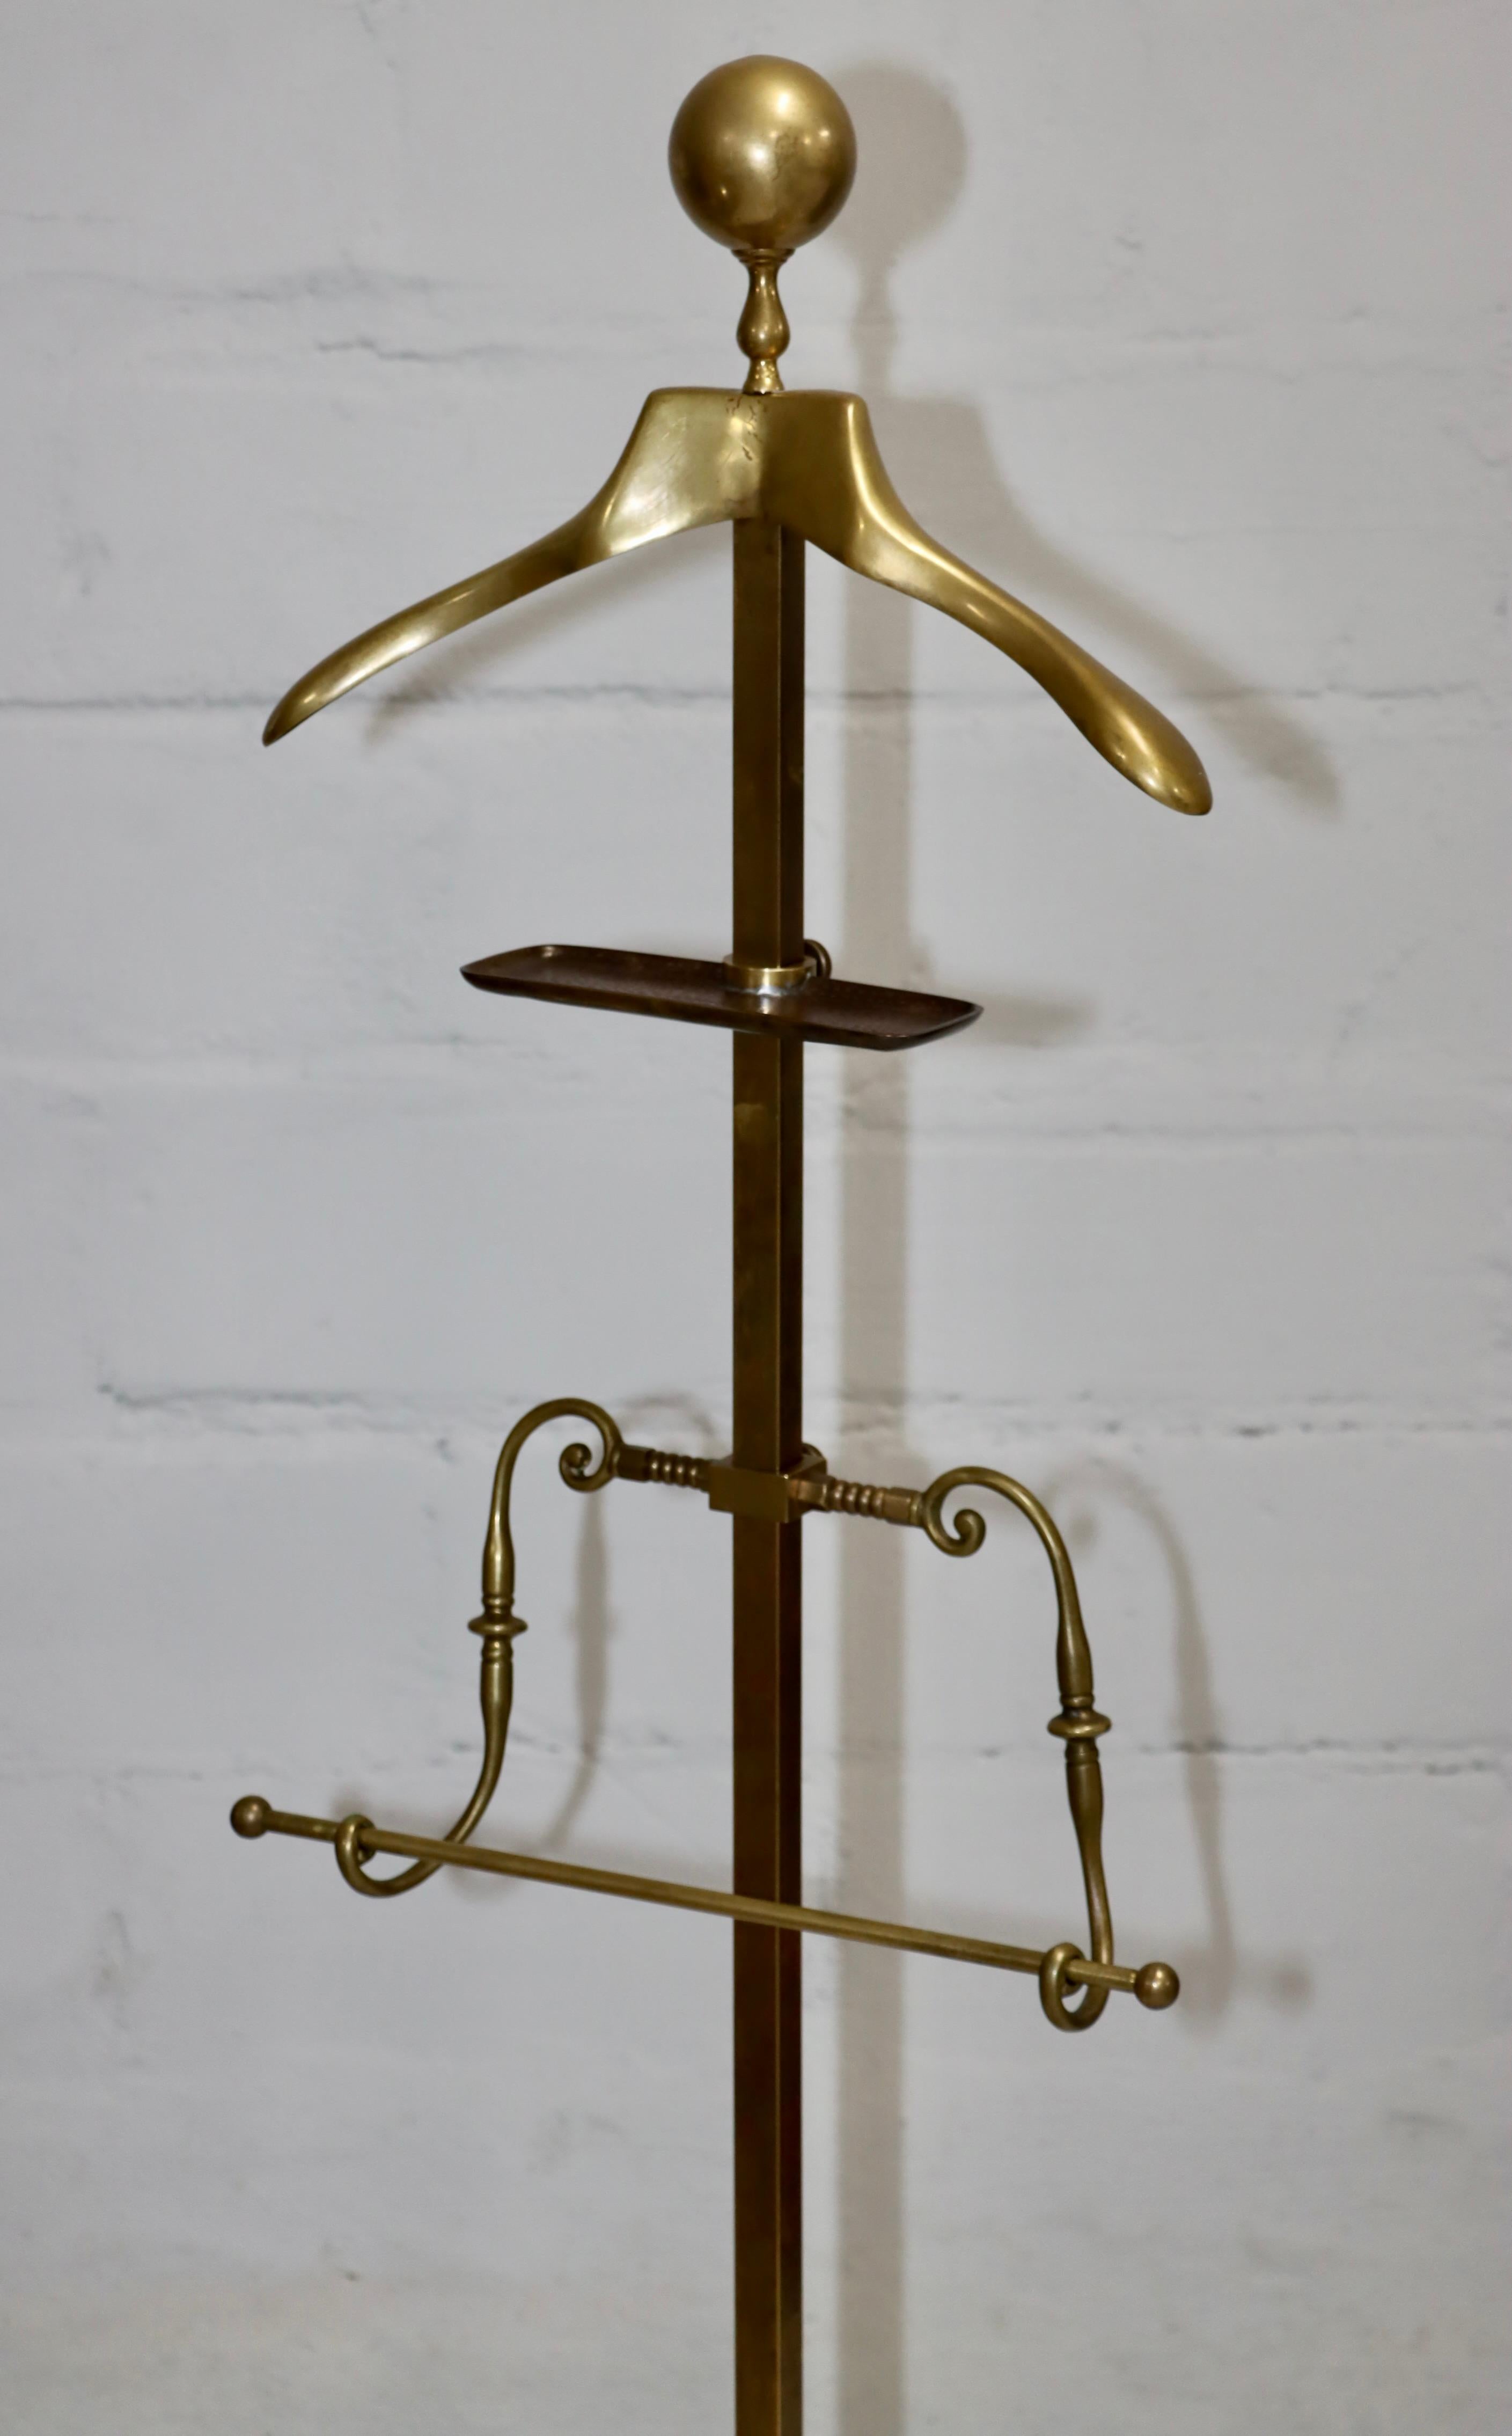 1960's modern patinated brass valet stand, in vintage original condition with some wear and patina due to age and use.